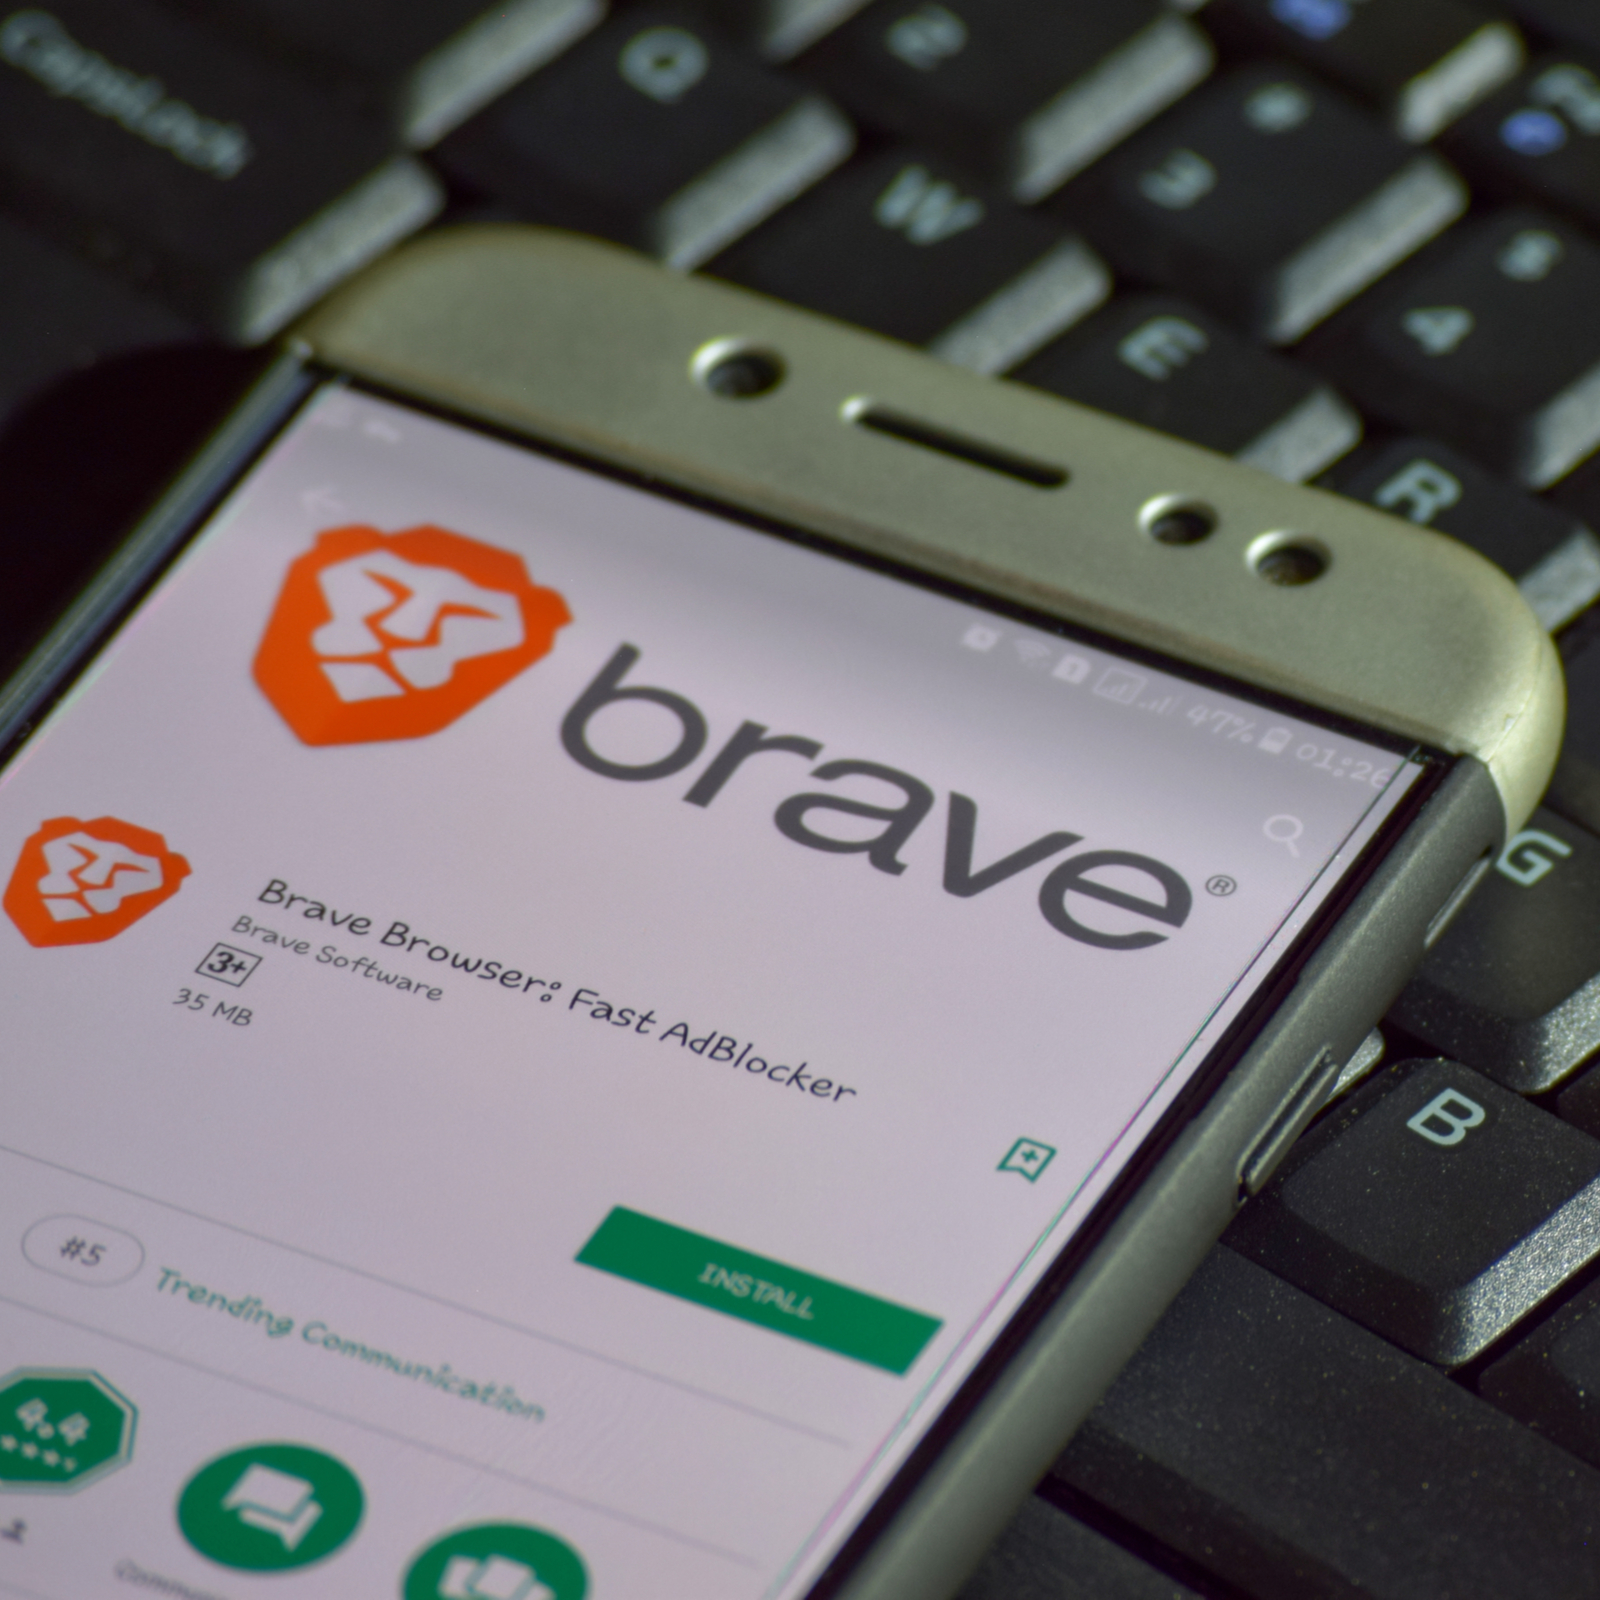 Brave Browser Launches Trial for Advertising Program